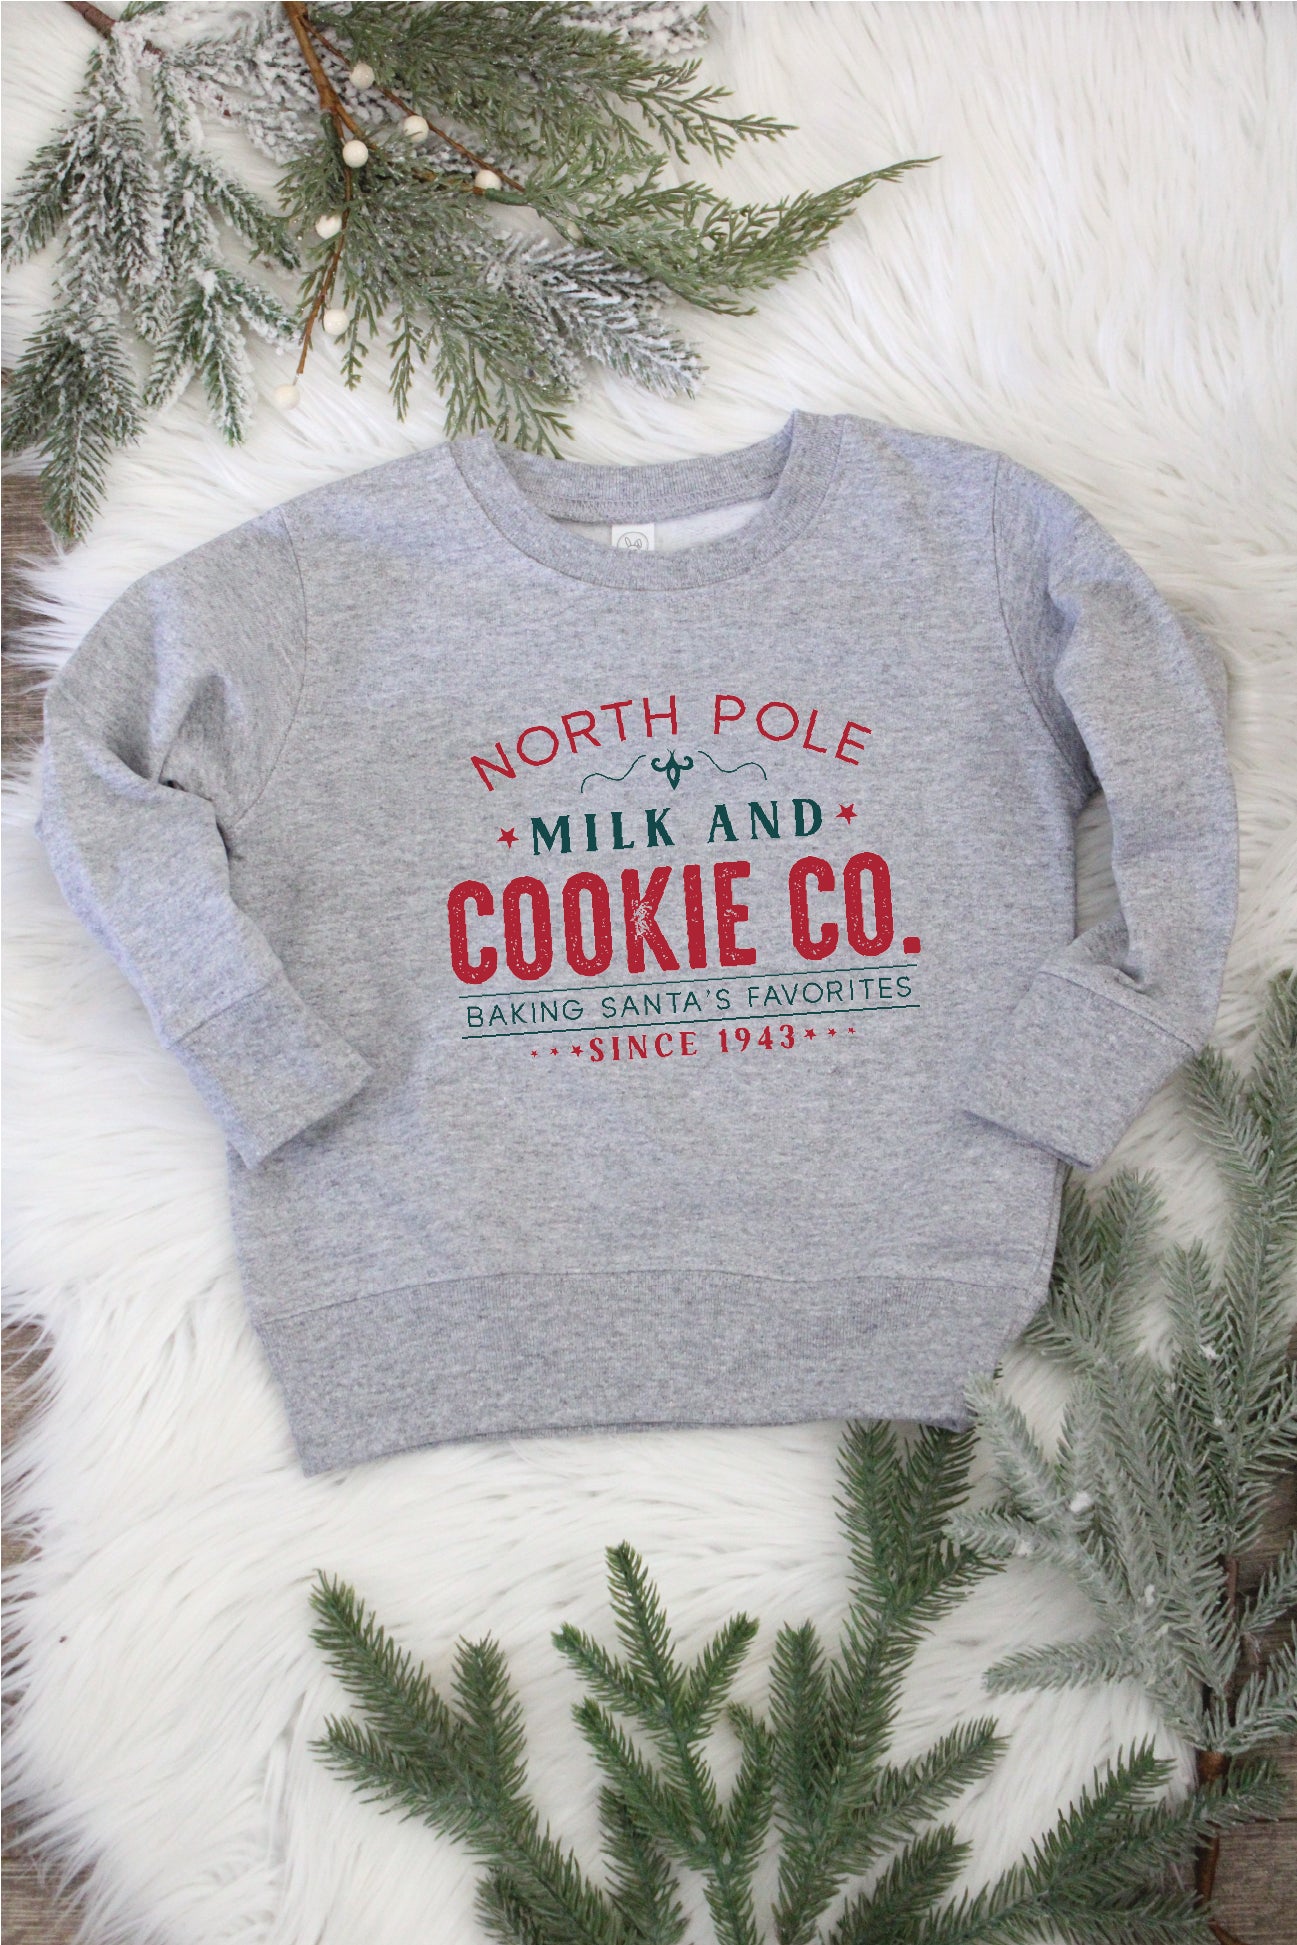 Milk and Cookie Co. Shirts